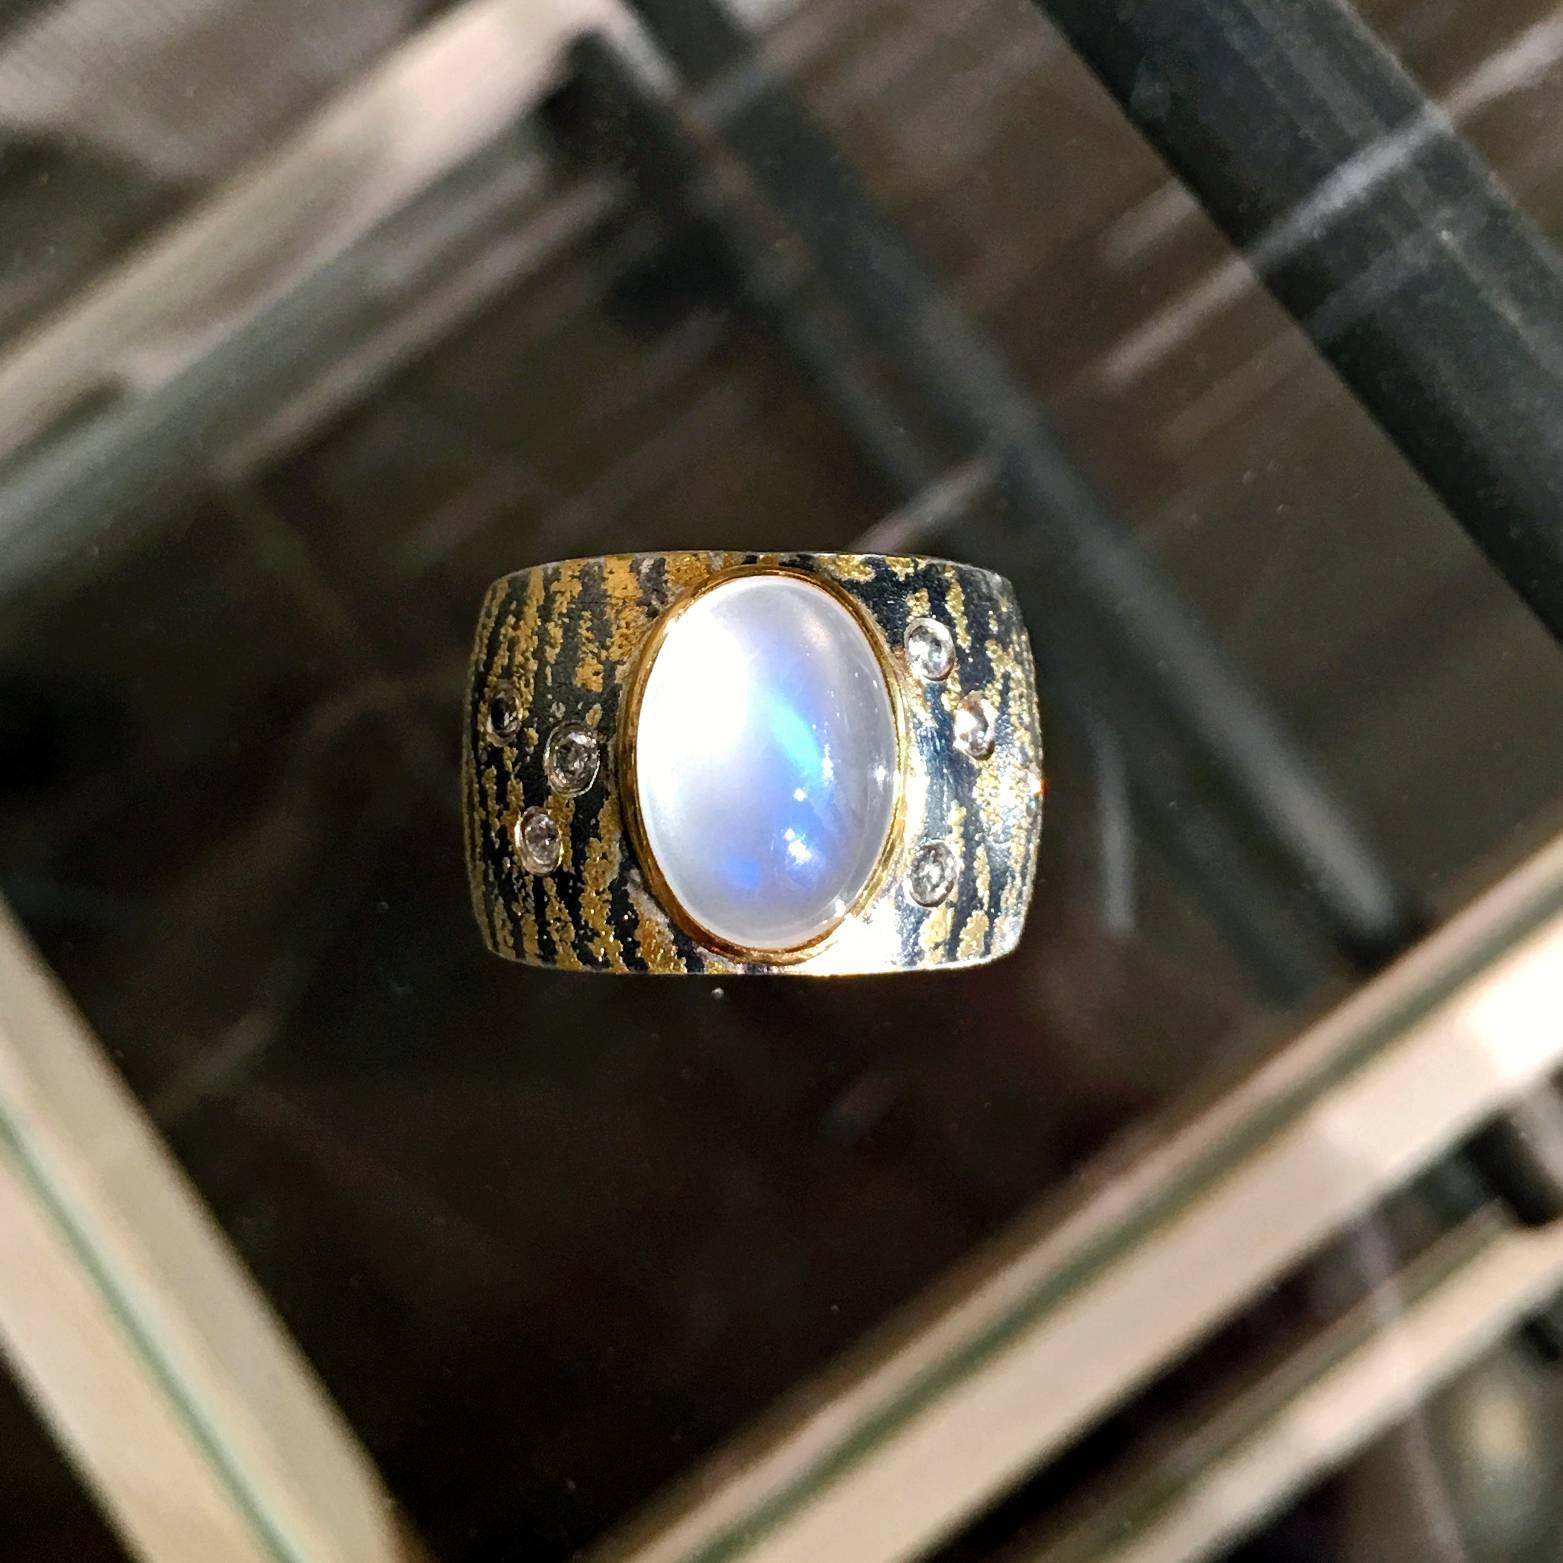 One-of-a-Kind Ring handcrafted by award-winning jewelry artist Atelier Zobel (Peter Schmid) in 24k gold, 22k yellow gold, and oxidized sterling silver showcasing a stunning silvery-white moonstone with intense, beautiful flashes of violet and blue,